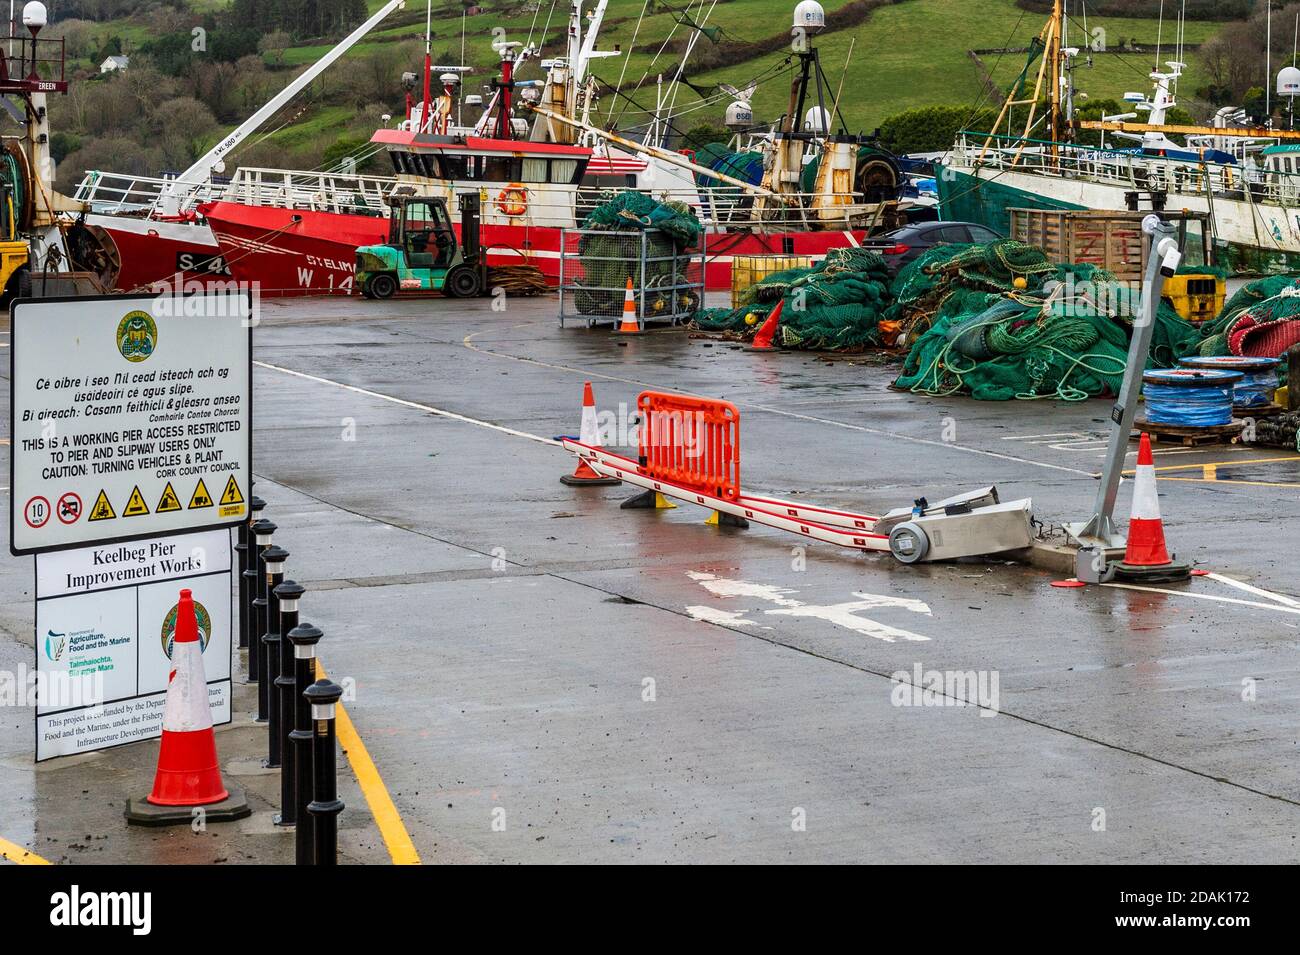 Union Hall, West Cork, Ireland. 13th Nov, 2020. The newly installed access barrier at Keelbeg Pier, Union Hall was destroyed last night. It is understood a van hit the barrier, causing approx. €10,000 worth of damage. Credit: AG News/Alamy Live News Stock Photo